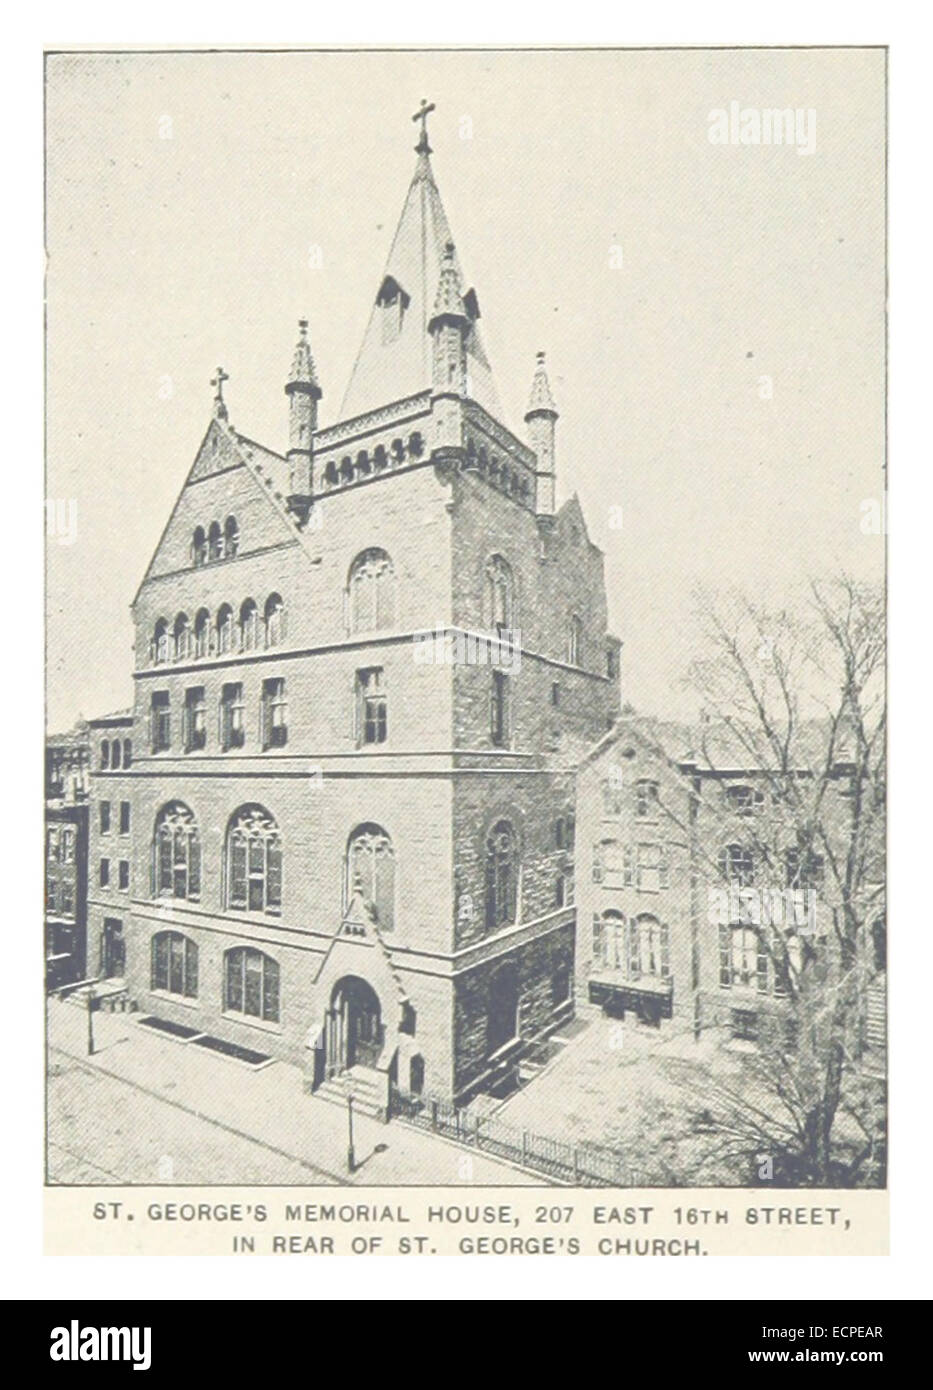 (King1893NYC) pg358 ST. GEORGE MEMORIAL HOUSE, 207 EAST 16th STREET, im Heck des ST. GEORGE-Kirche Stockfoto